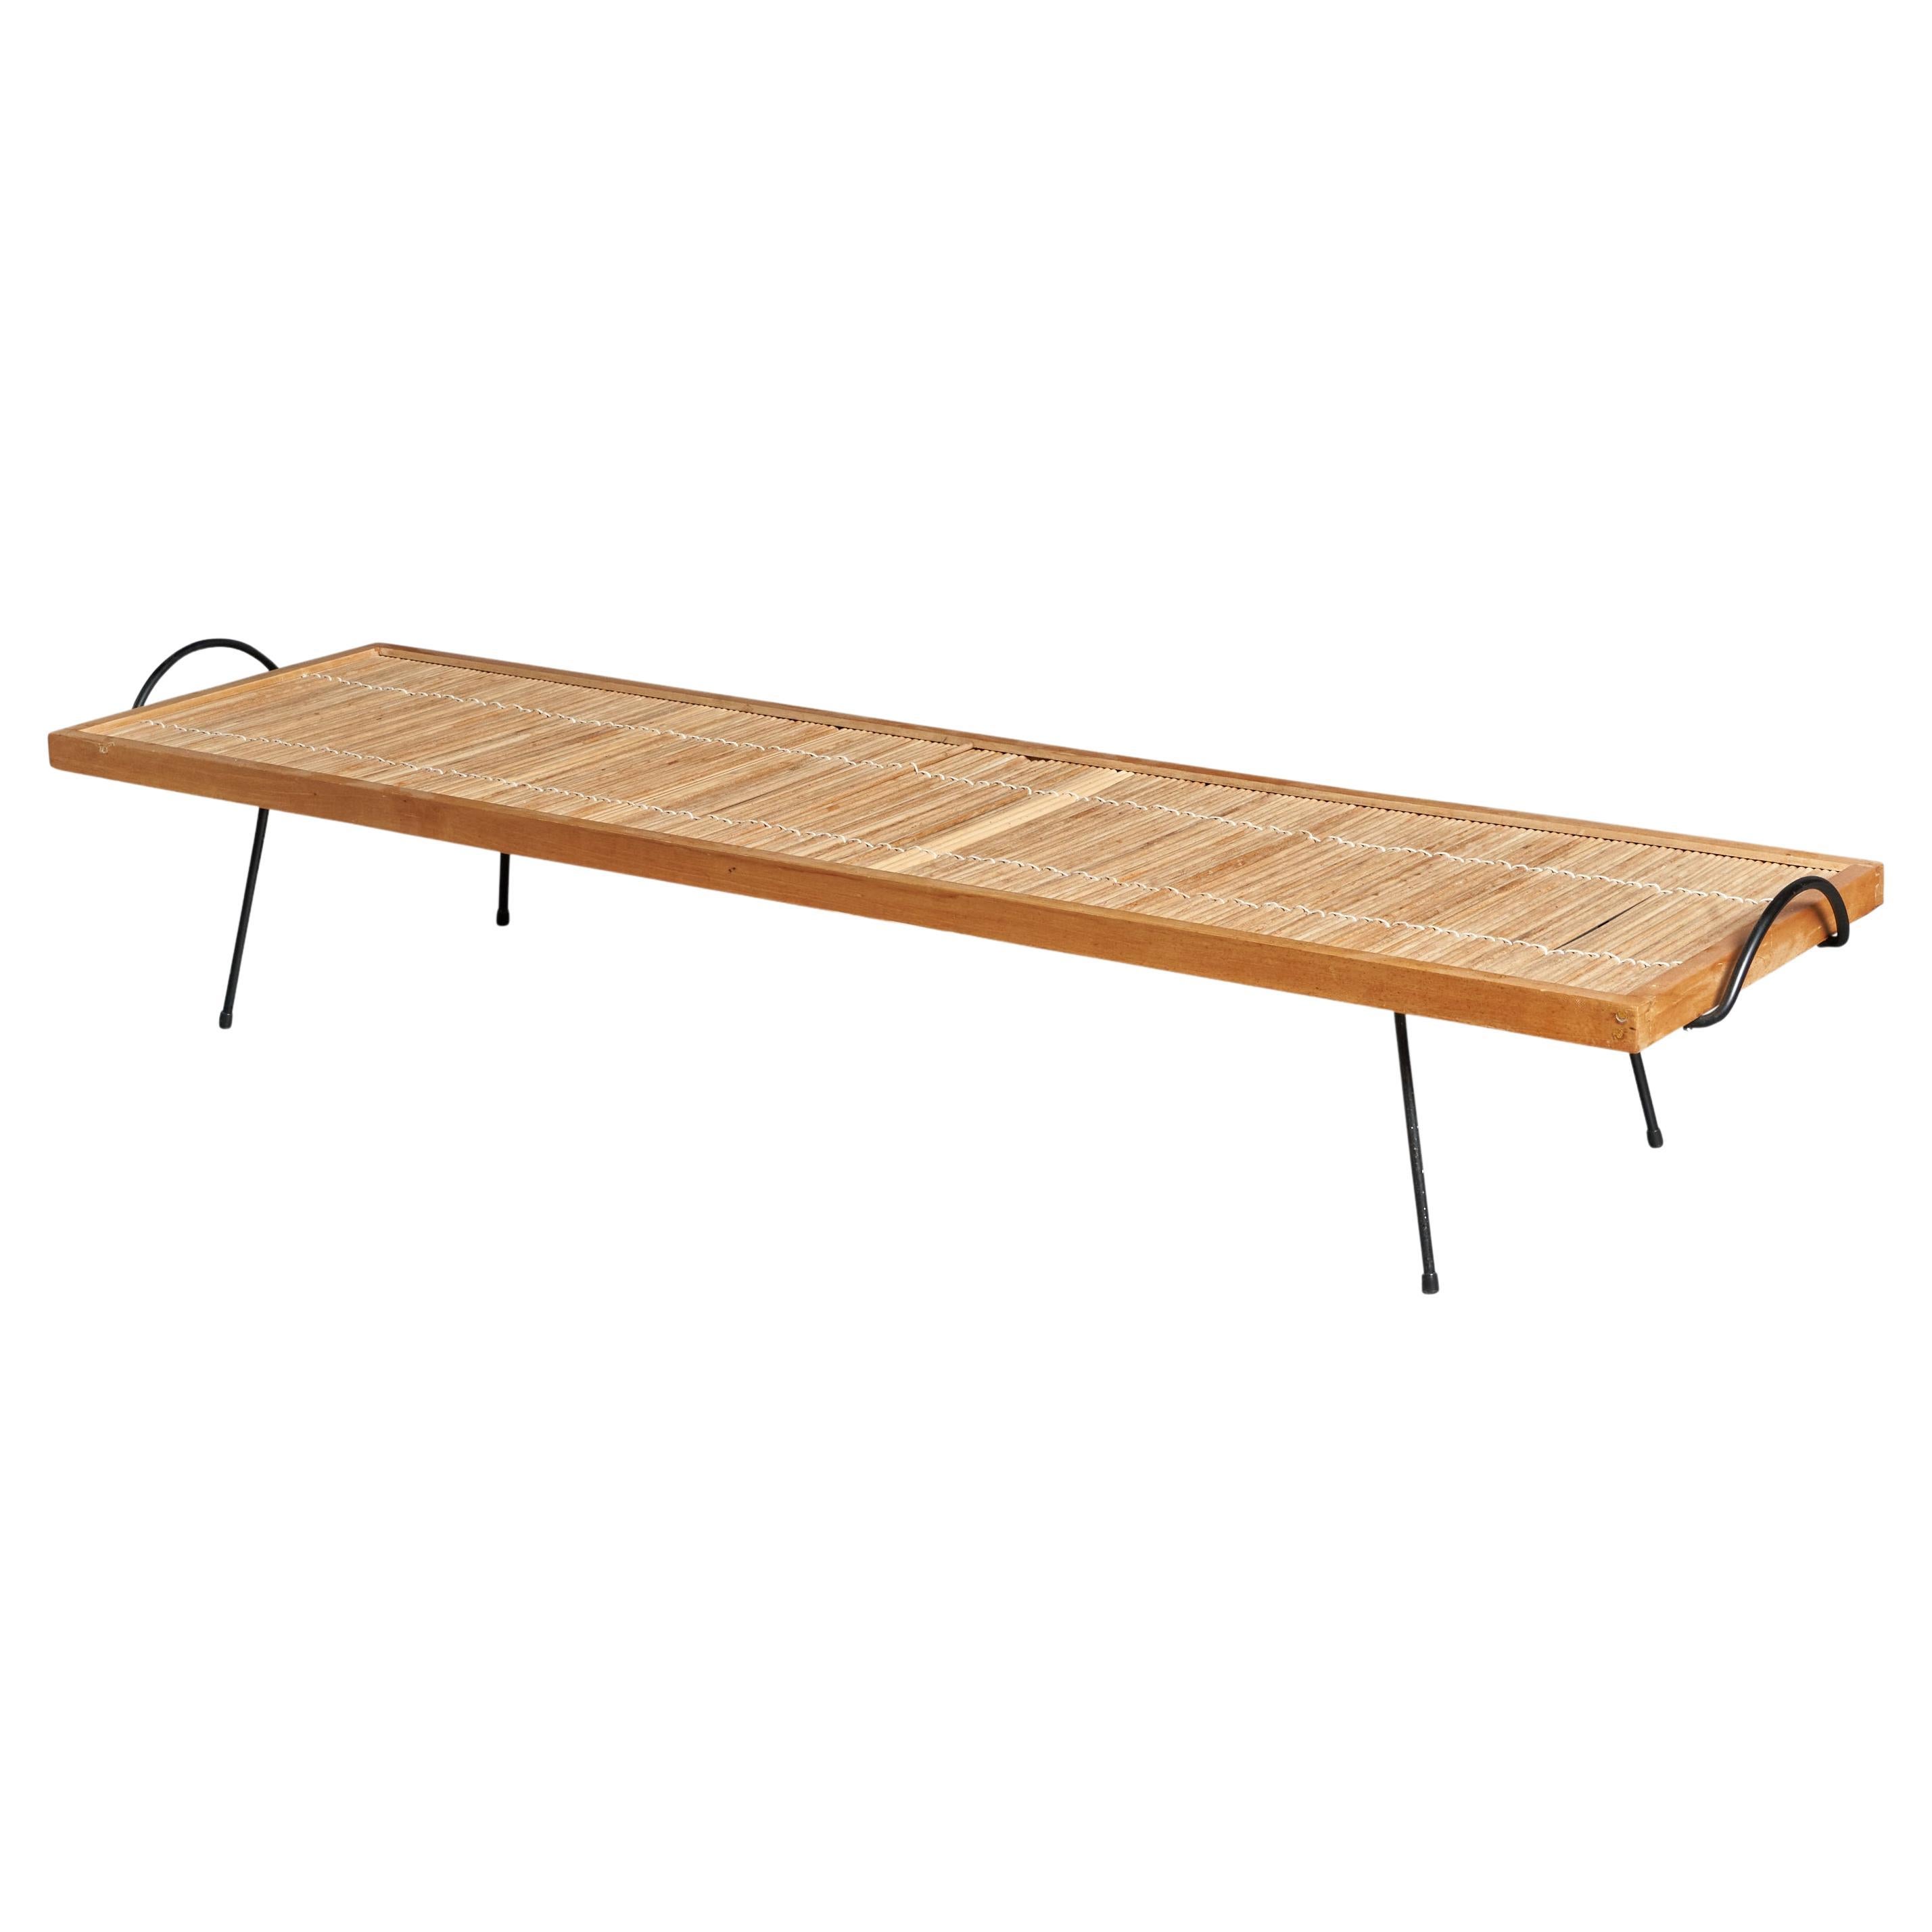 Katavolos, Littell and Kelley, Bench, Metal, Wood, Reed, USA, 1950s For Sale